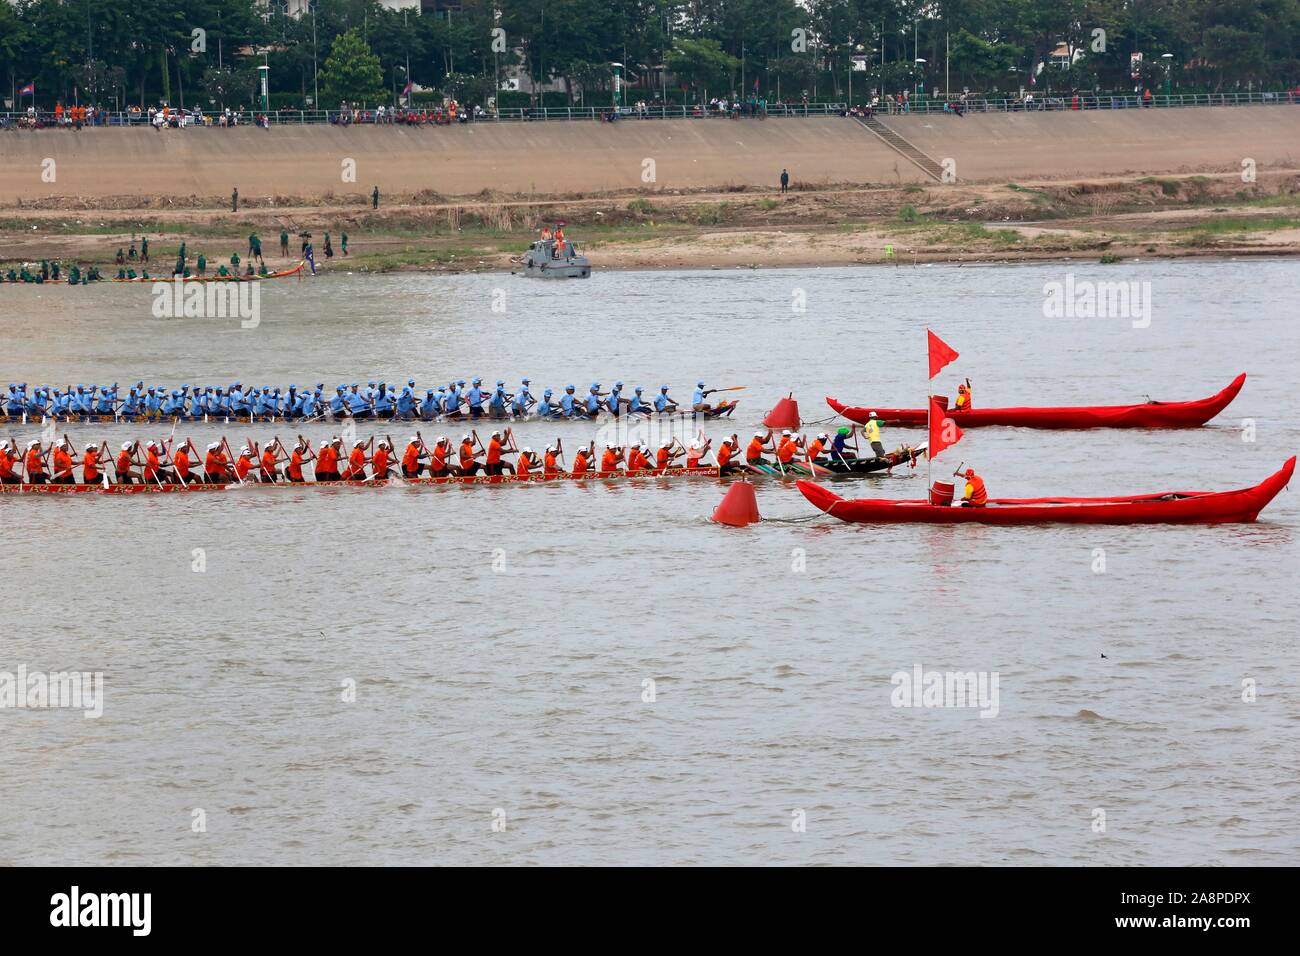 Phnom Penh, Cambodia. 10th Nov, 2019. Participants race their boats in the Tonle Sap river during the Water Festival in Phnom Penh, Cambodia, Nov. 10, 2019. Tens of thousands of spectators flocked to the riverside here on Sunday for an 838-year-old boat racing tradition, which is held to celebrate the annual Water Festival. TO GO WITH "Feature: Tens of thousands cheer for centuries-old boat race in Cambodian capital" Credit: Sovannara/Xinhua/Alamy Live News Stock Photo